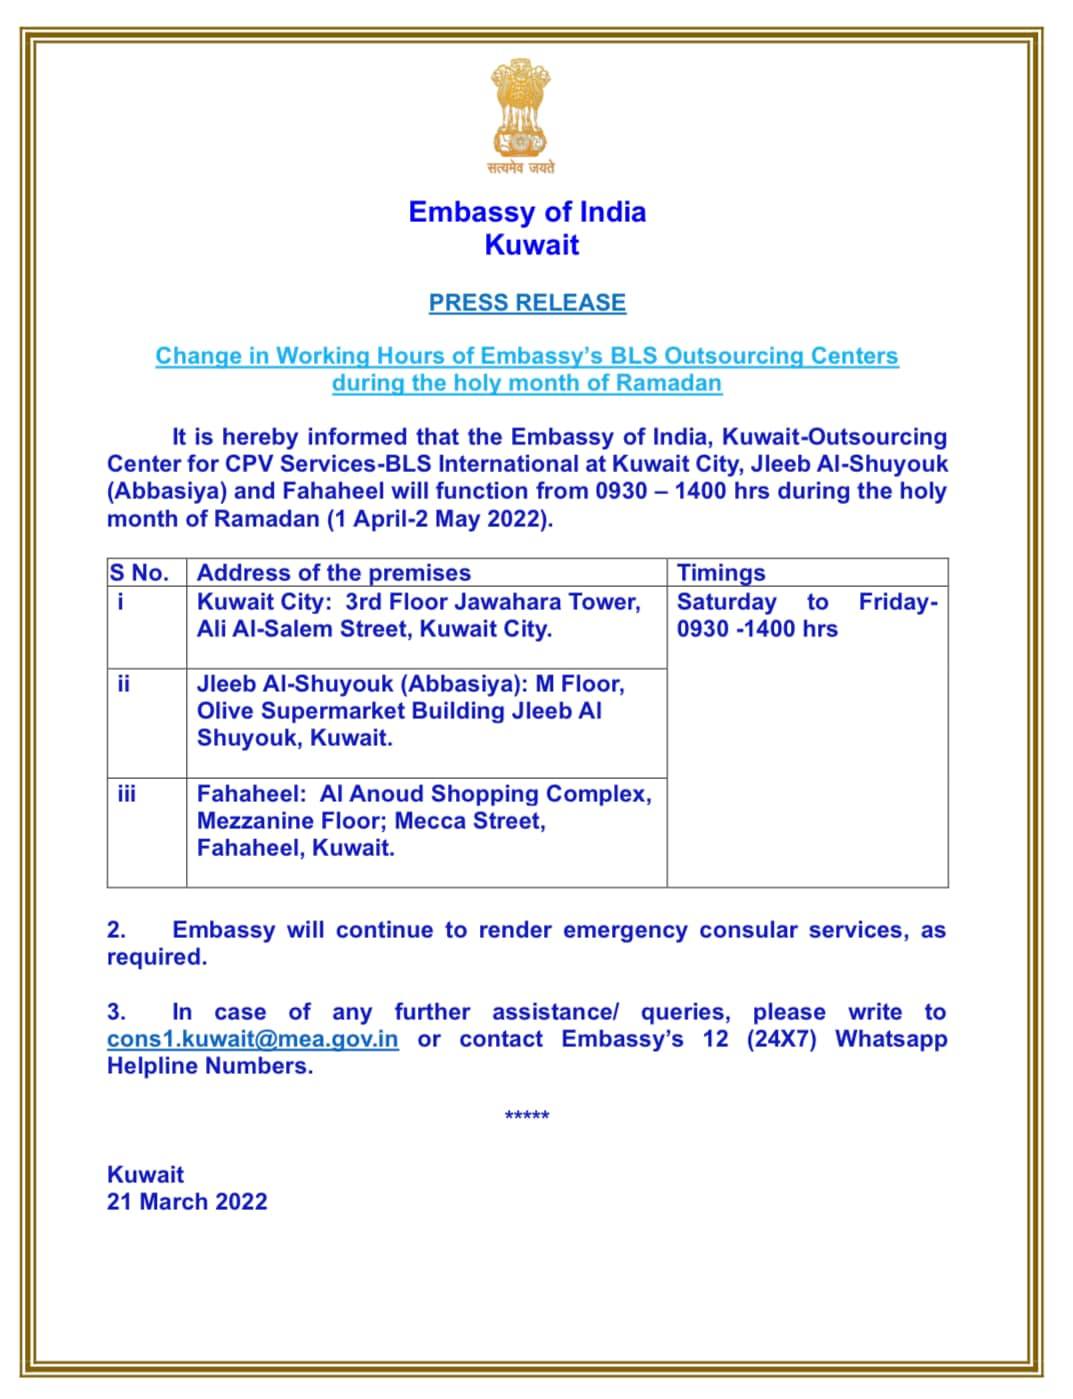 Working Hours of Indian Embassy Passport Centers, BLS Centers during the Ramadan-2022